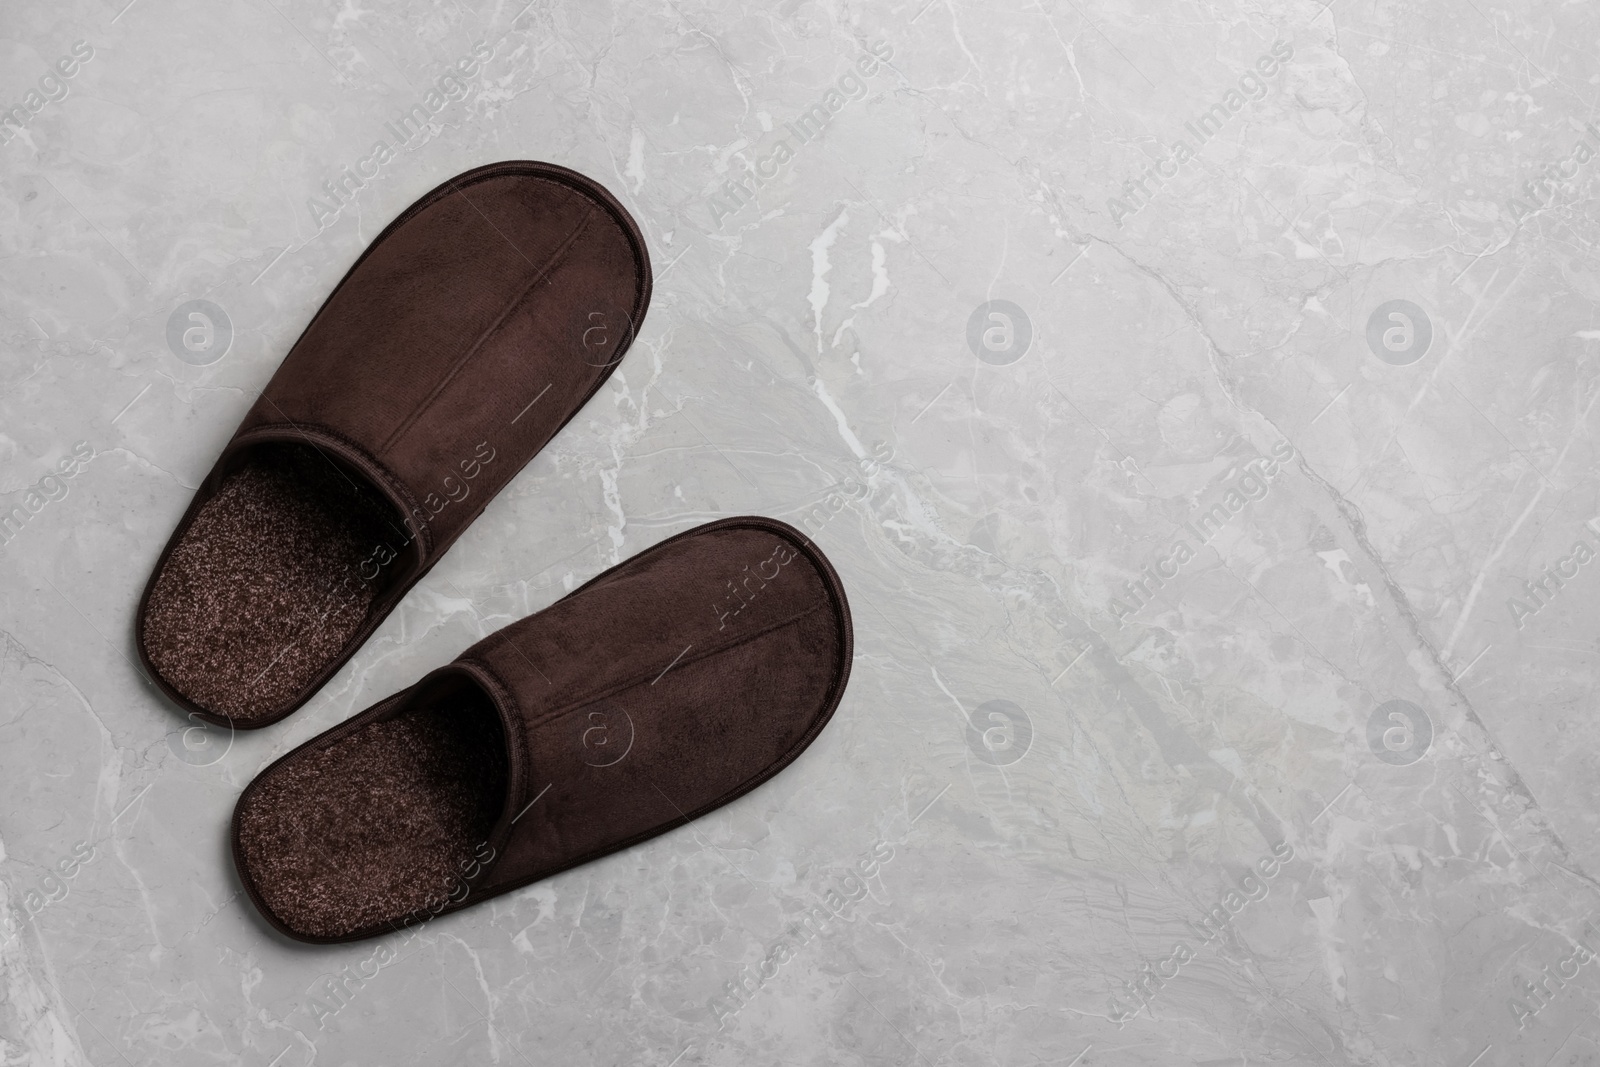 Photo of Pair of brown slippers on grey marble floor, top view. Space for text